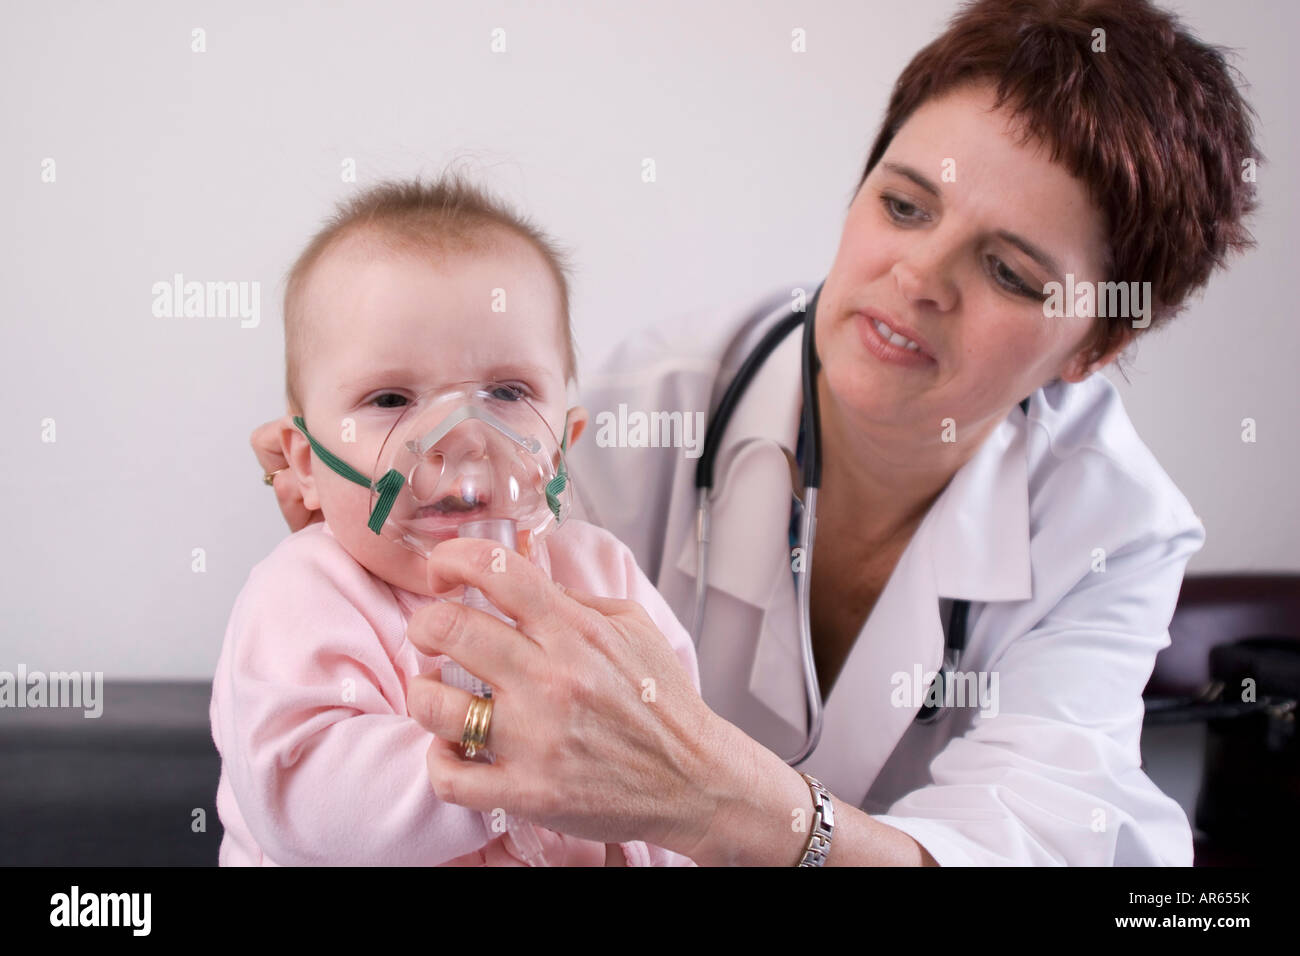 Seven month old baby with a nebulizer mask Stock Photo